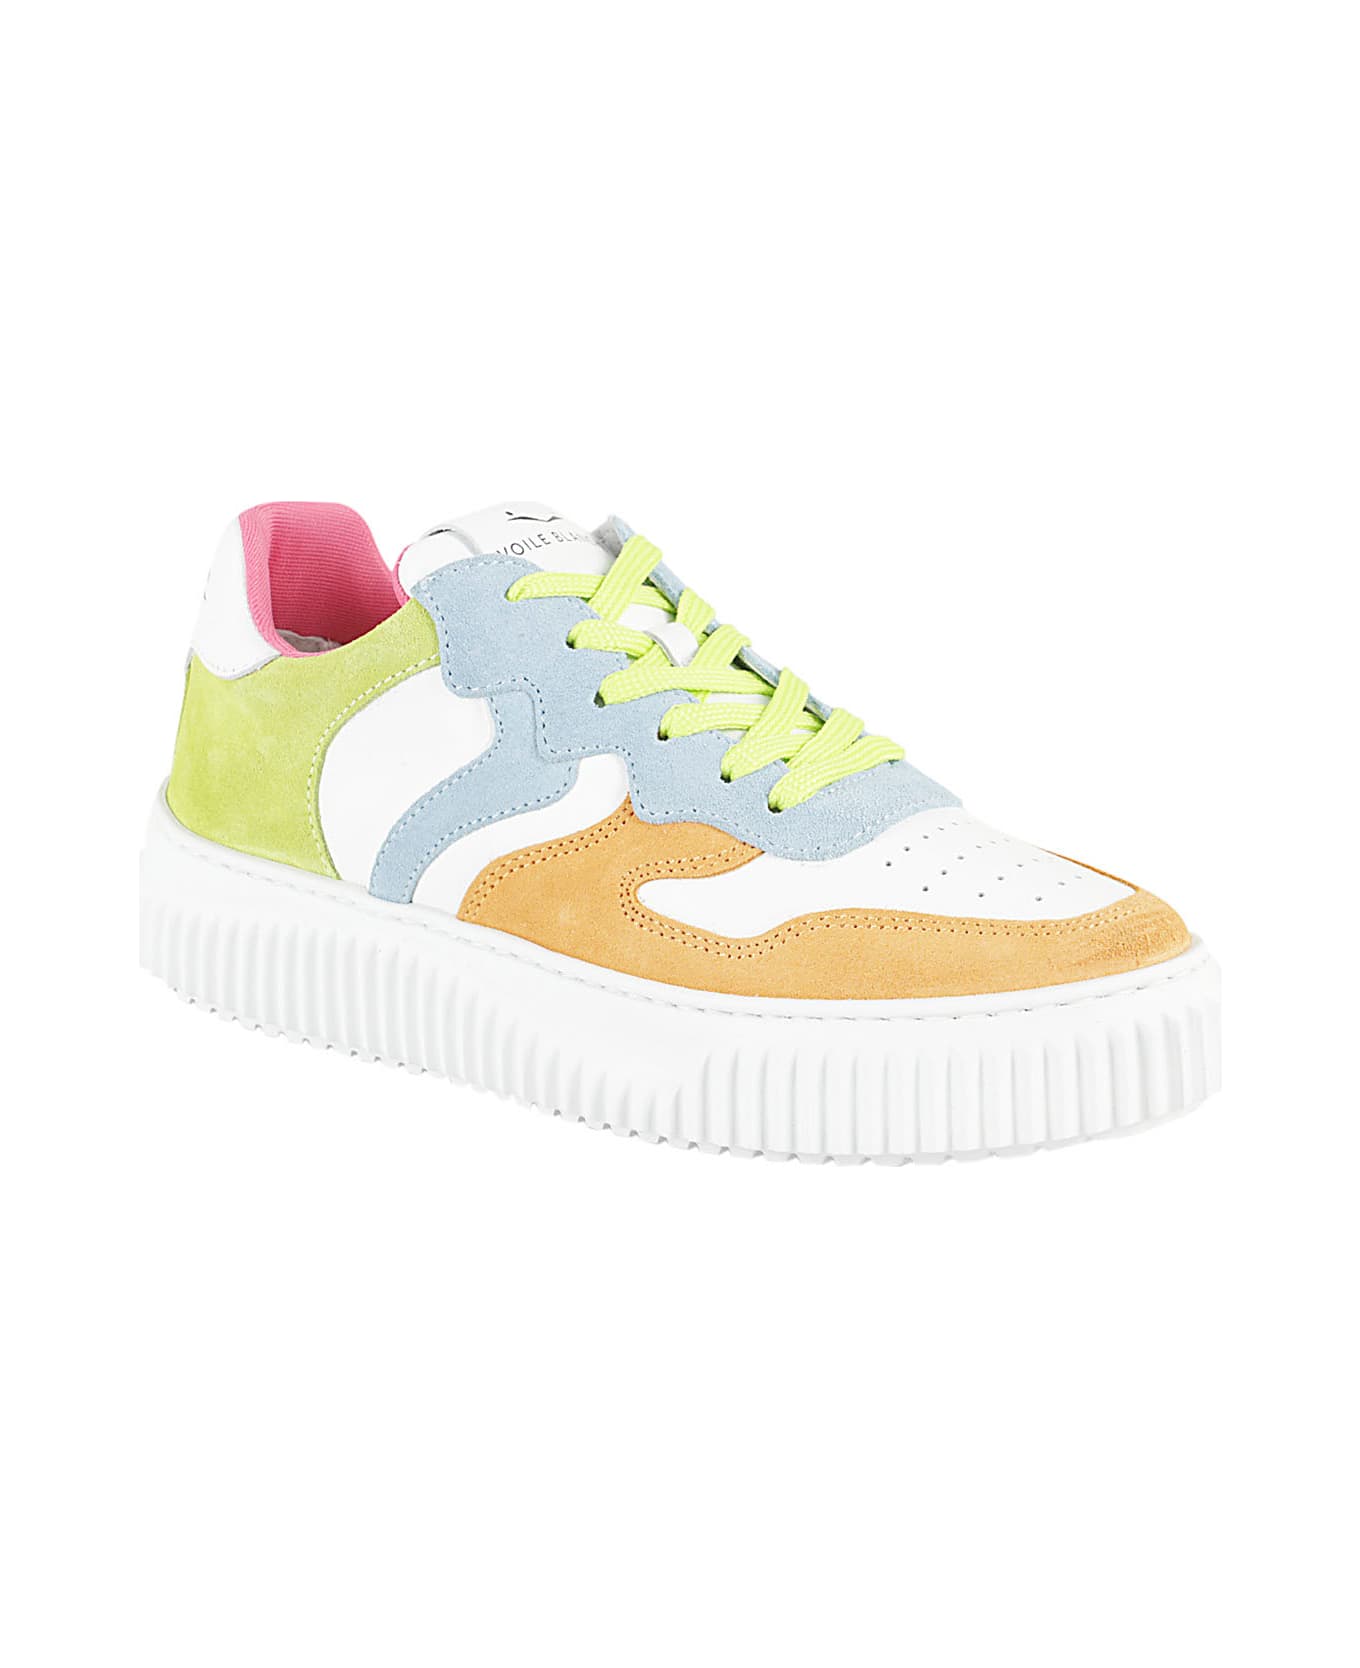 Voile Blanche Laura Suede - Peach Sky Blue Lime ウェッジシューズ